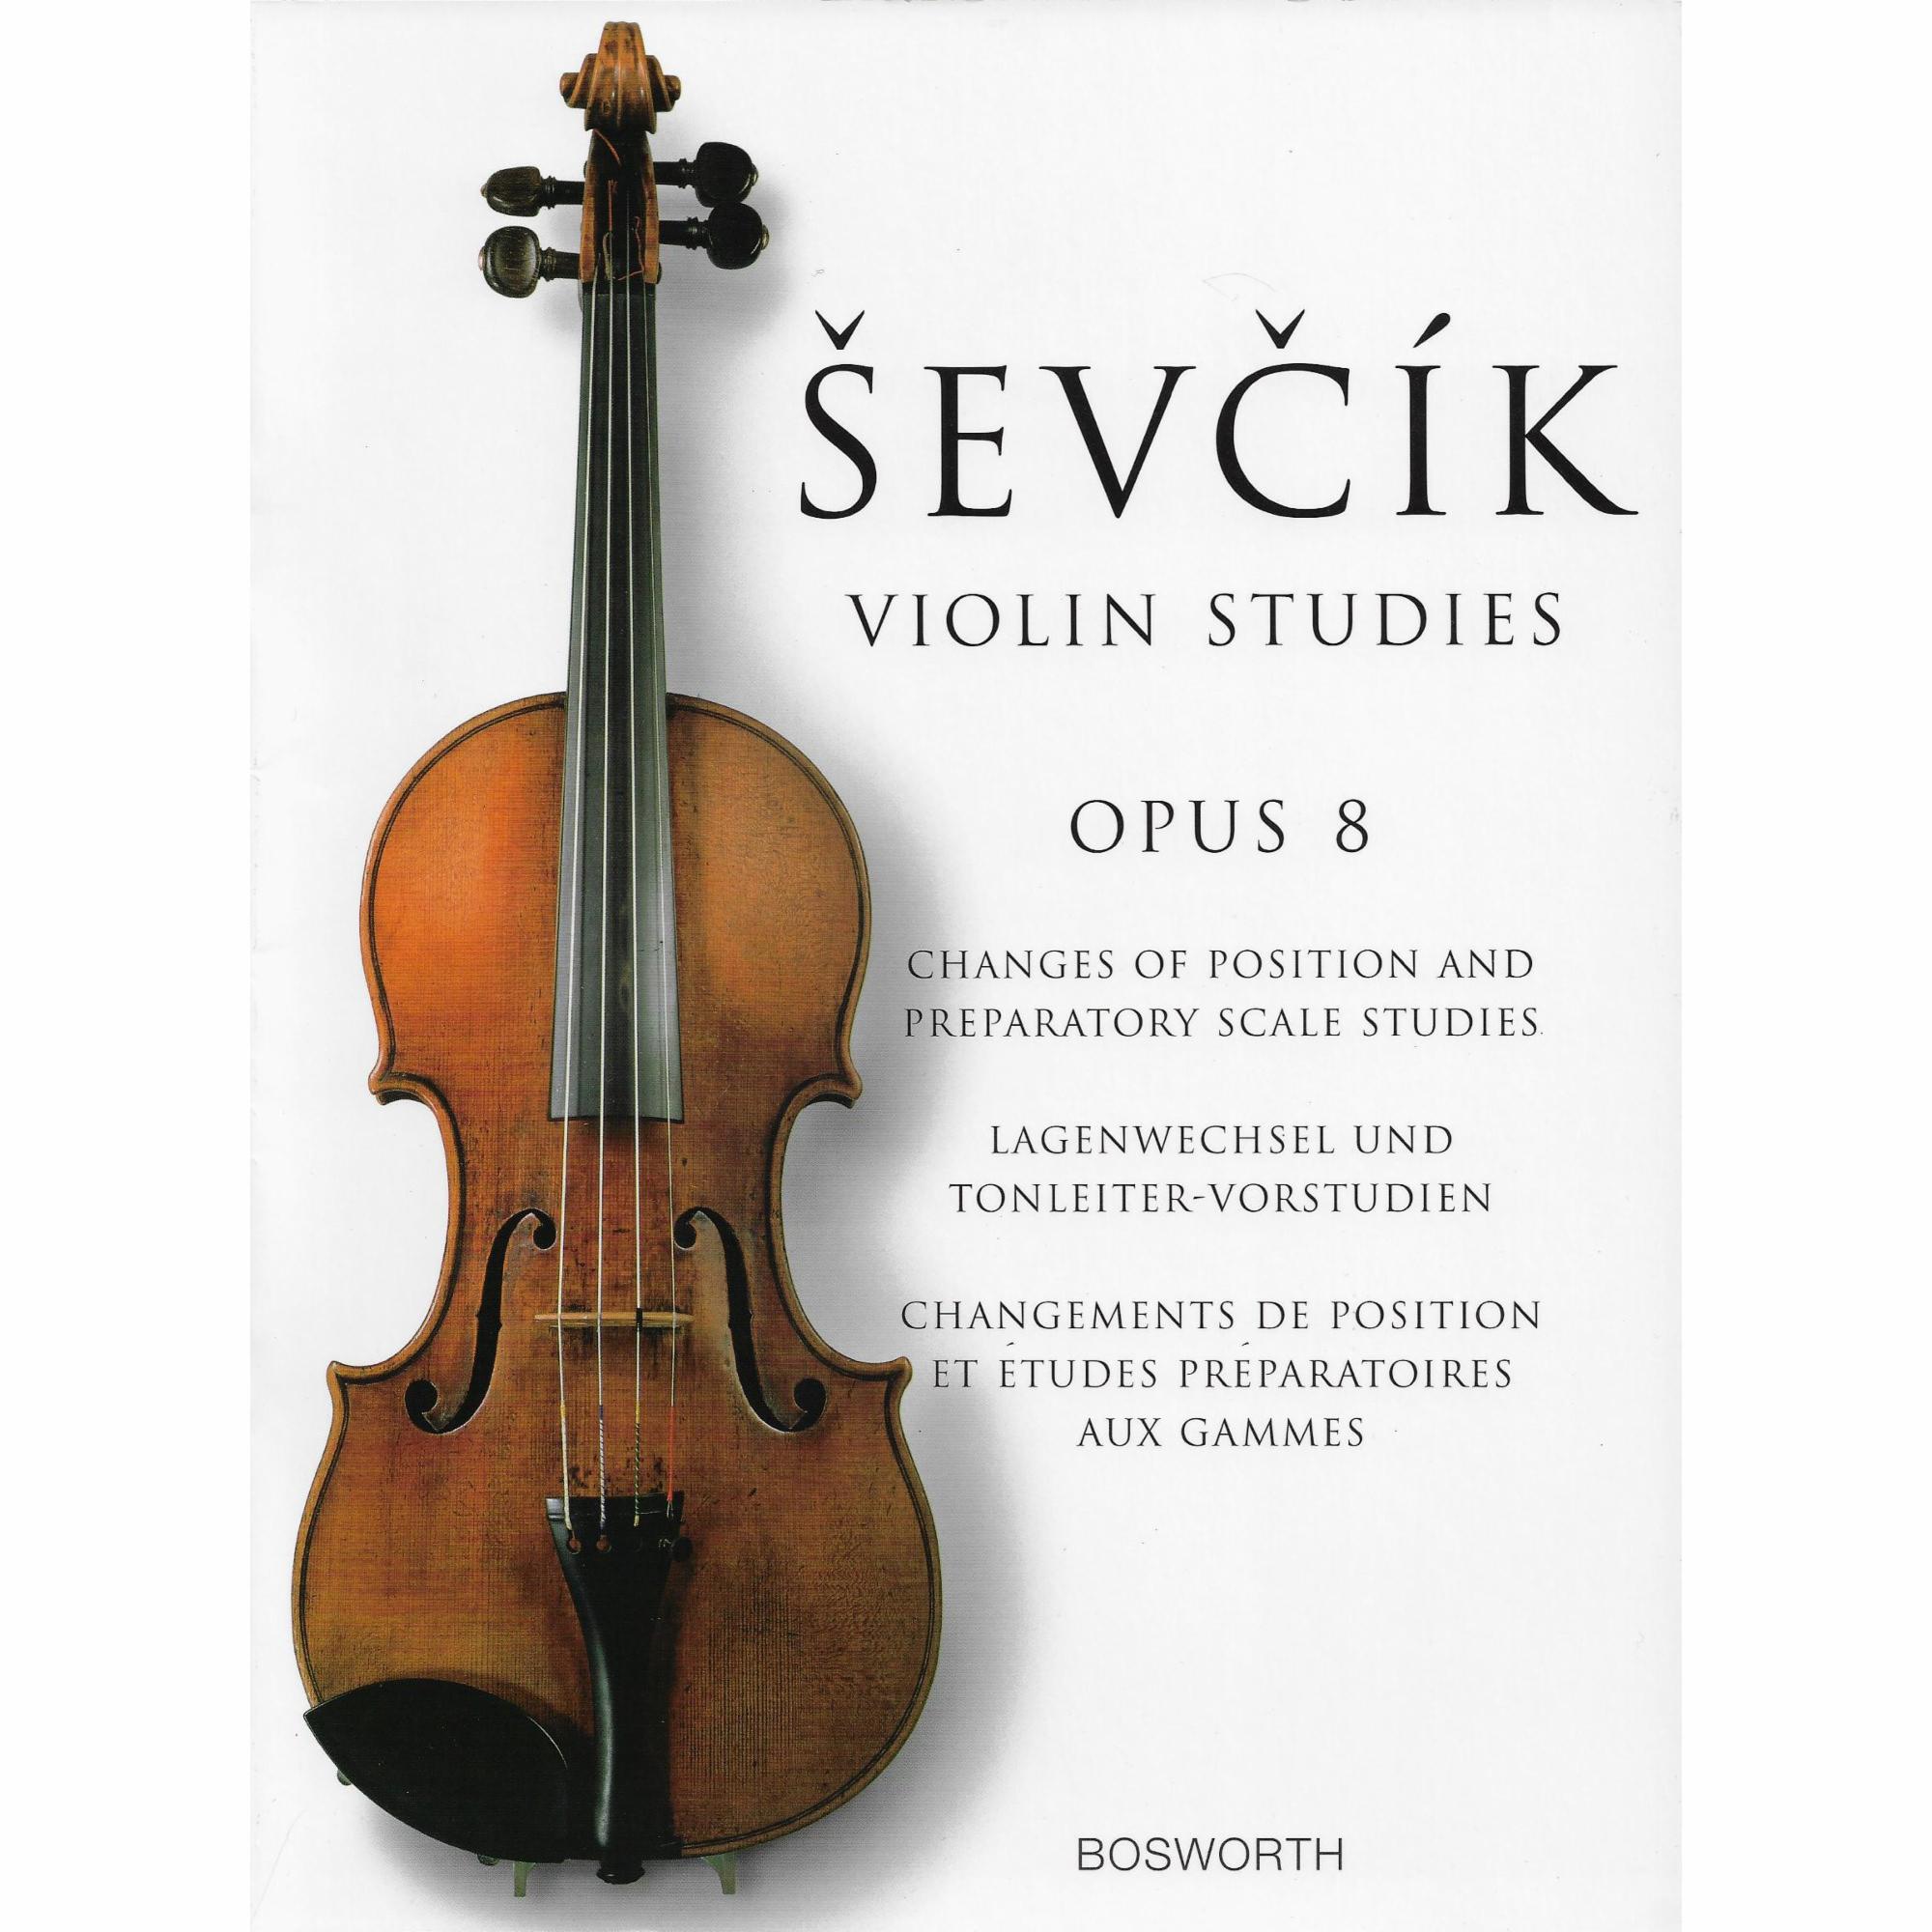 Sevcik -- Changes of Position and Preparatory Scale Studies, Op. 8 for Violin